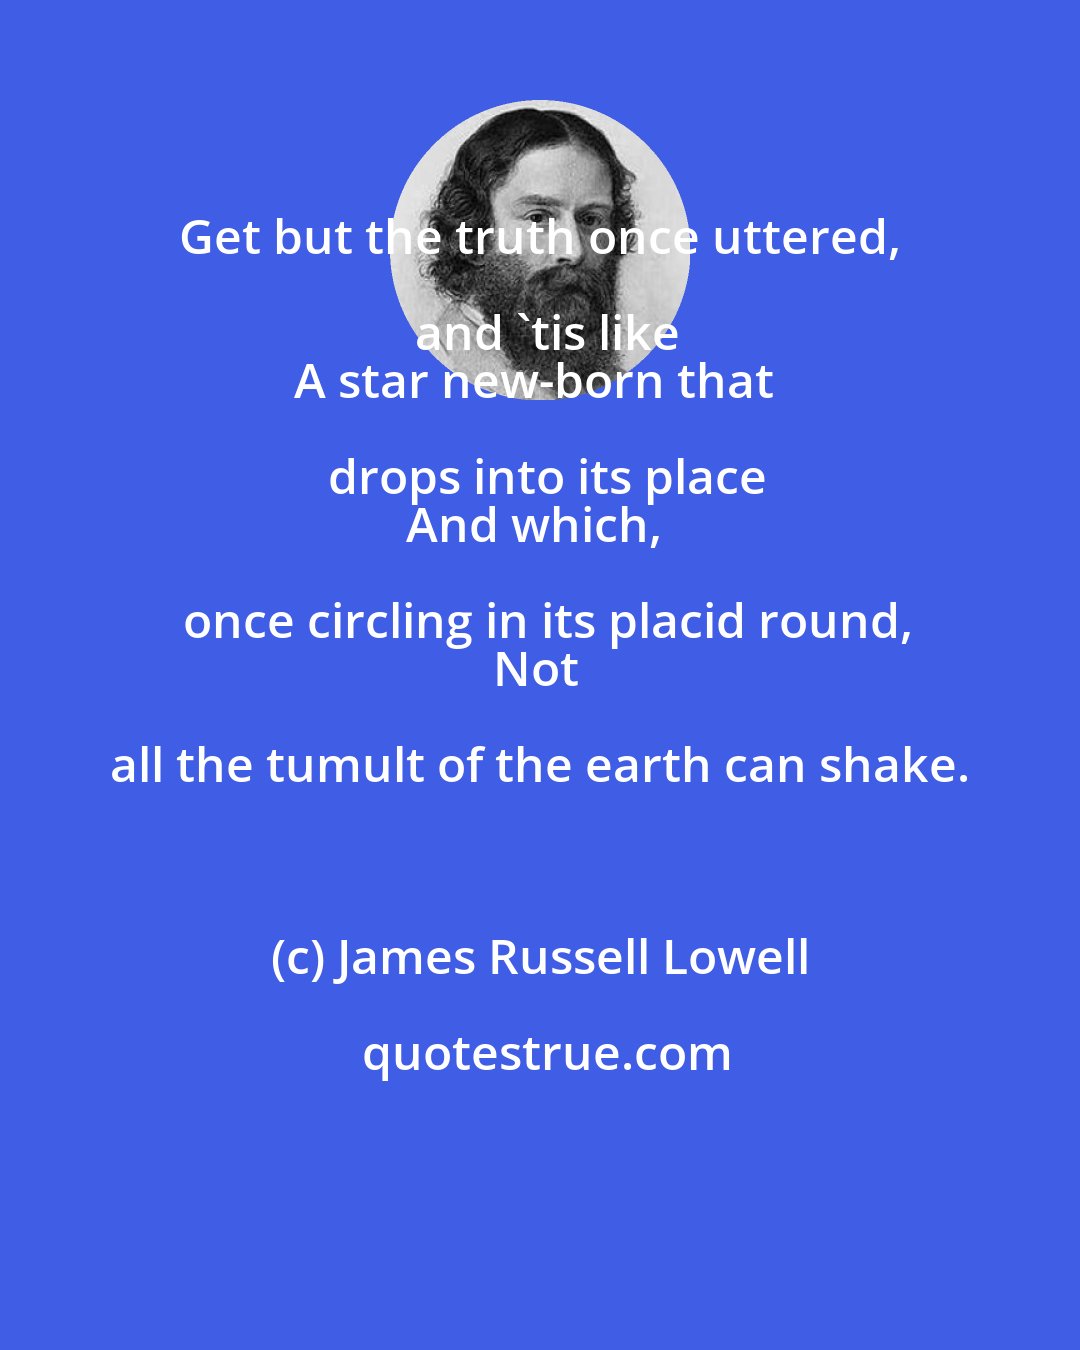 James Russell Lowell: Get but the truth once uttered, and 'tis like
A star new-born that drops into its place
And which, once circling in its placid round,
Not all the tumult of the earth can shake.